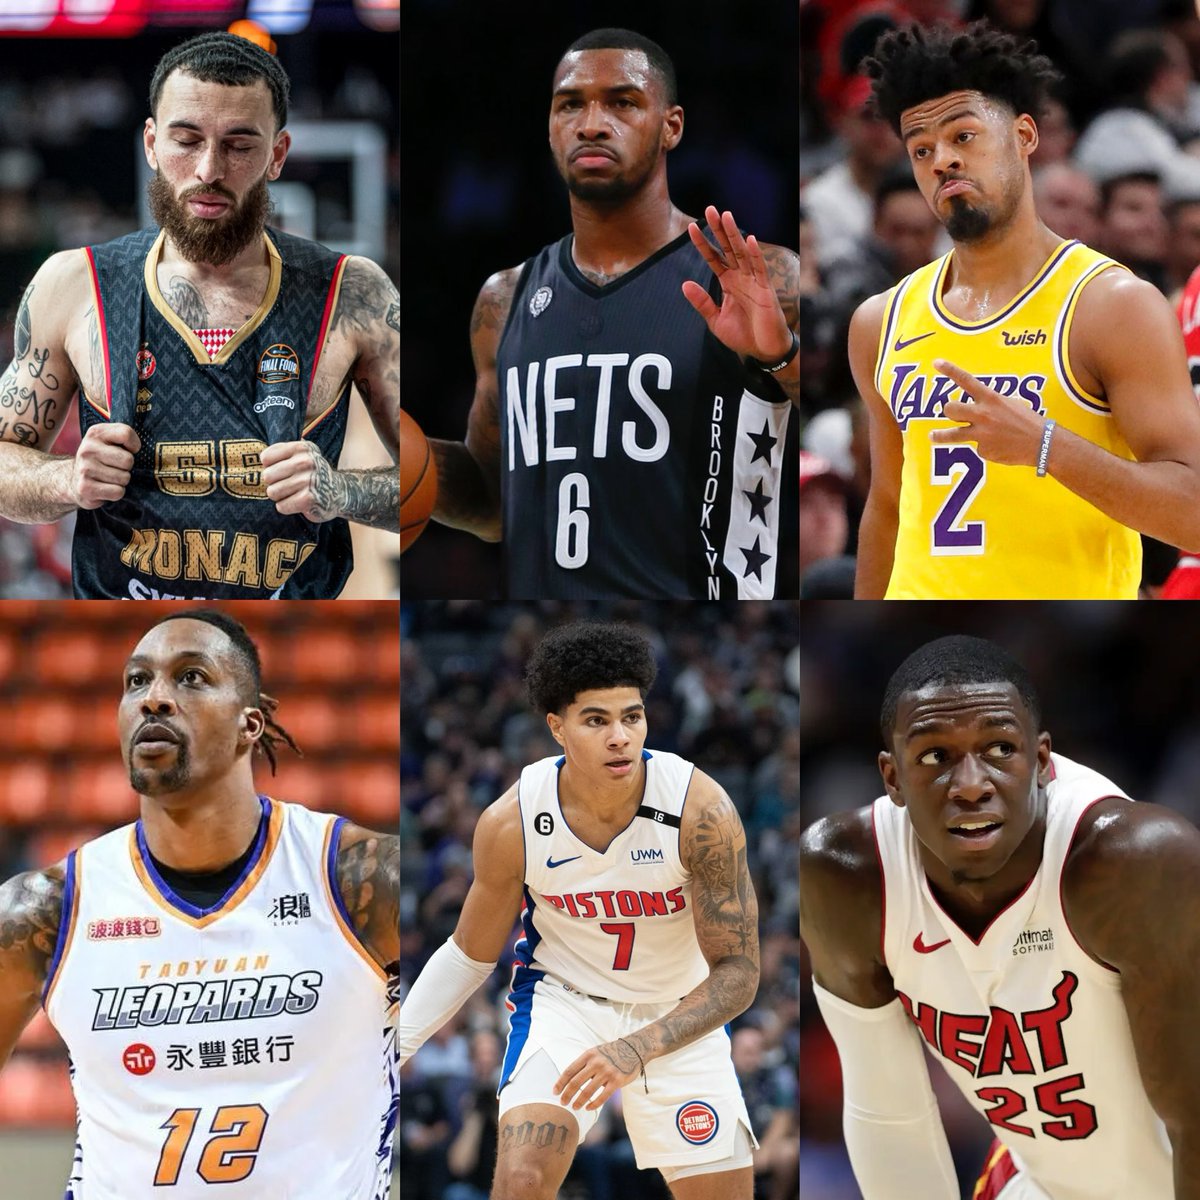 Which free agent/international hooper would perform the best in @thebig3 this season?